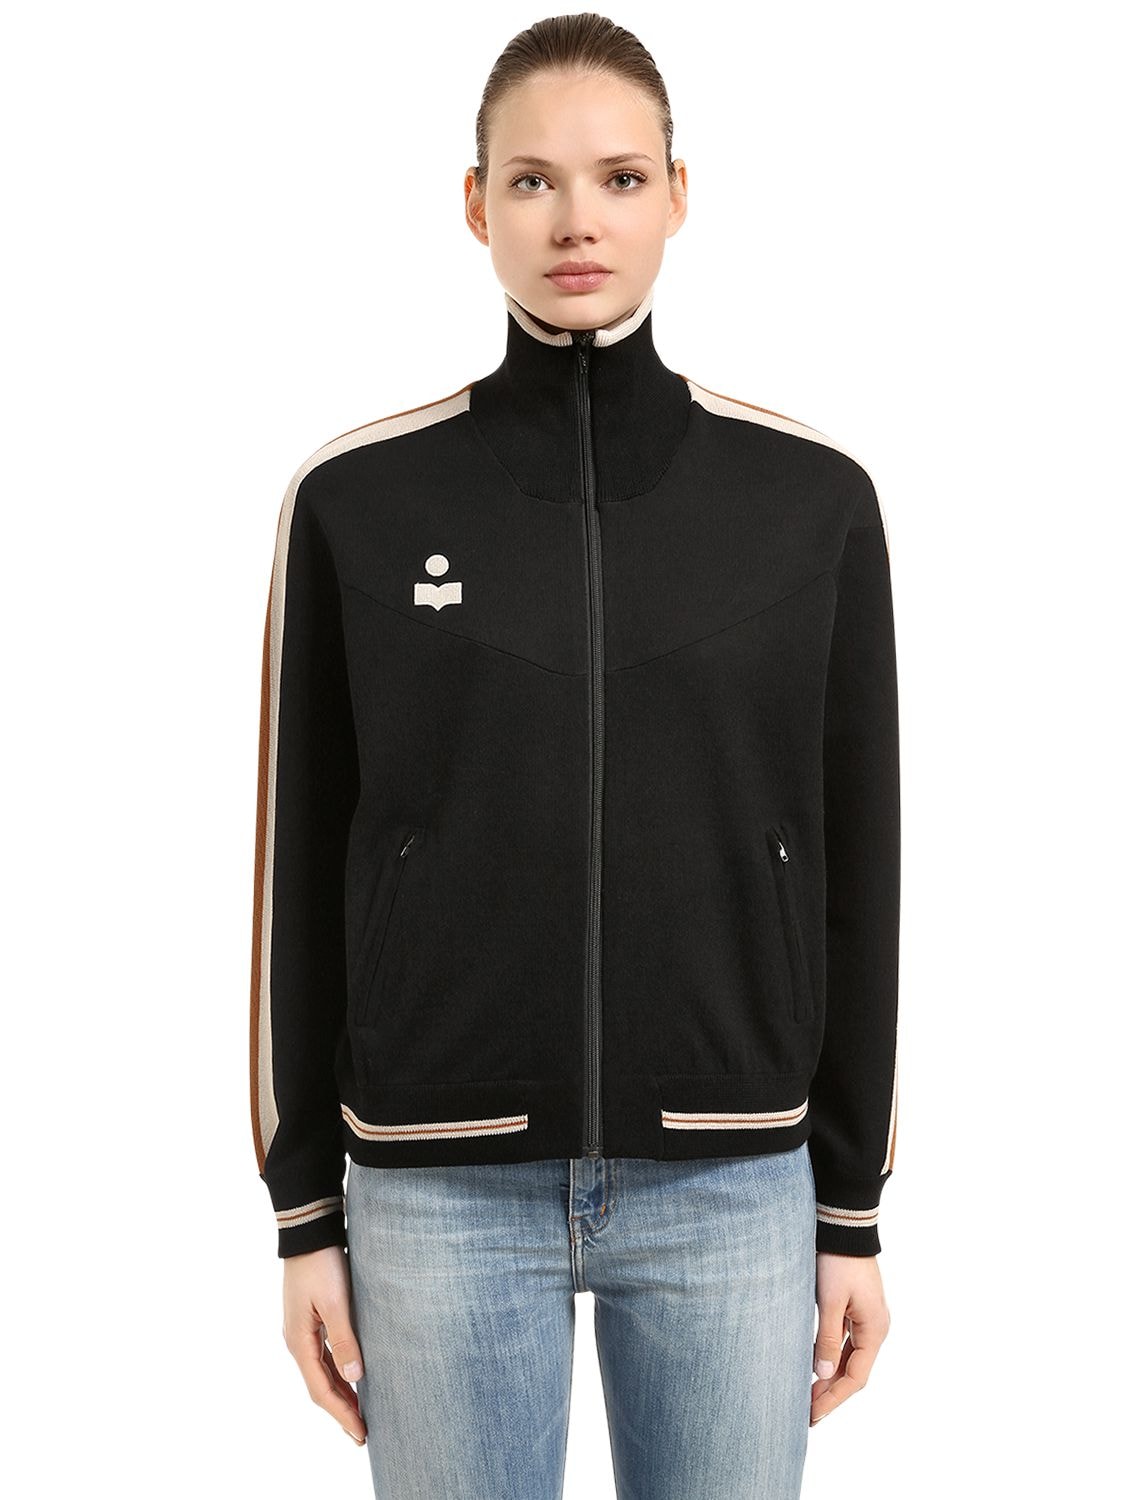 ISABEL MARANT ÉTOILE STRETCH VISCOSE JERSEY TRACK JACKET,67IE1B021-MDFCSw2